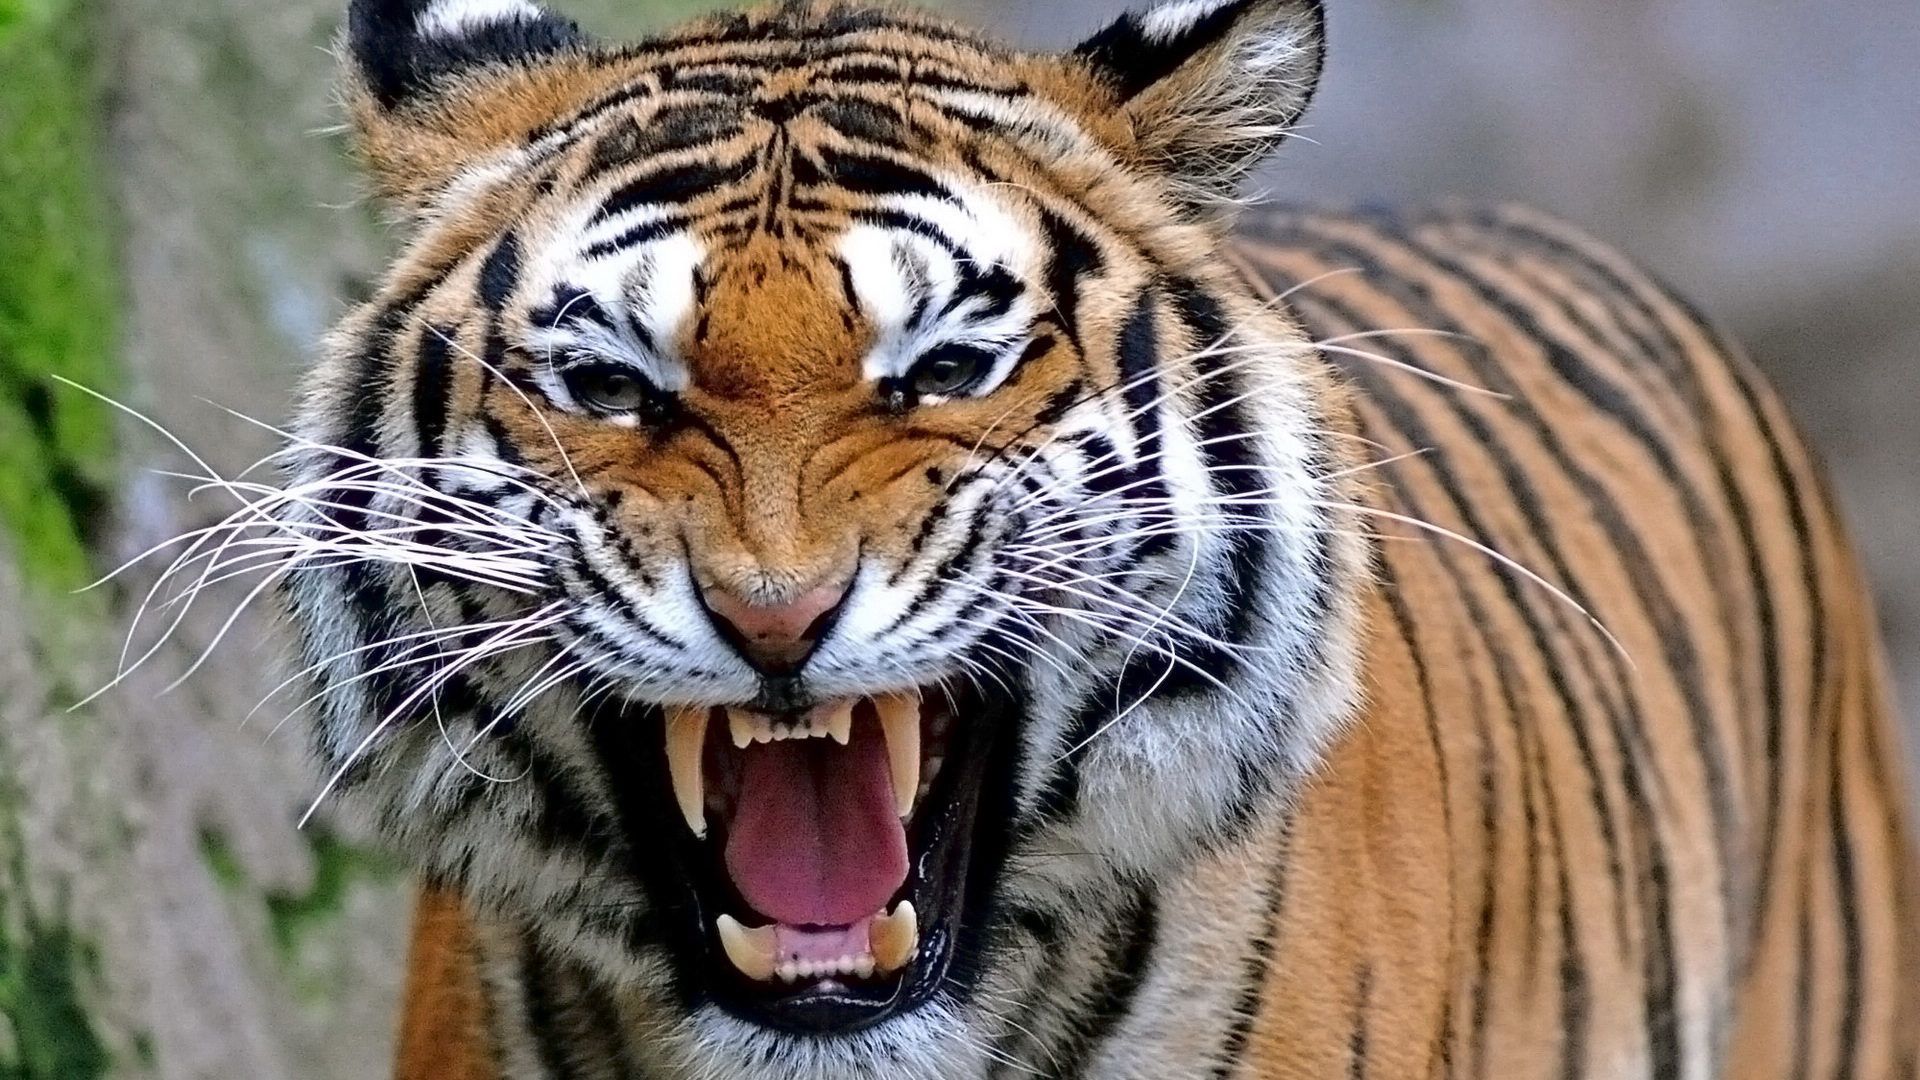 Tiger HD Wallpapers Free Download - Tremendous Wallpapers